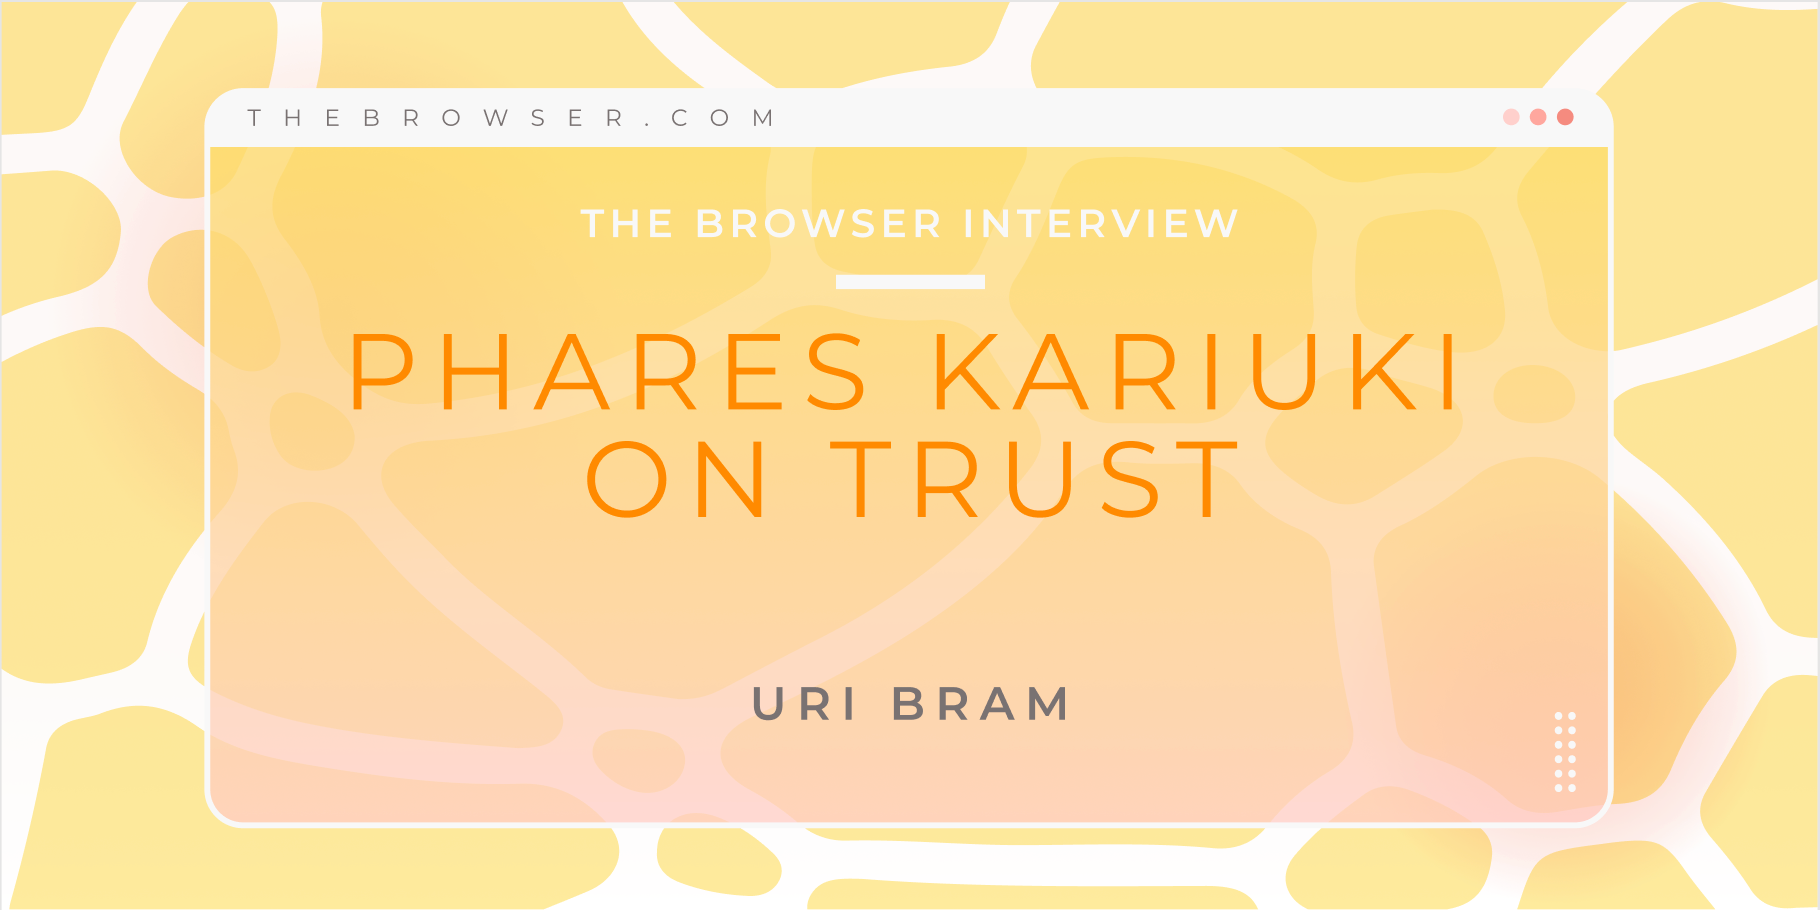 Uri Bram: I'm very glad to be here today with Phares Kariuki, technologist and entrepreneur -- I've been telling people for years that you're my favou